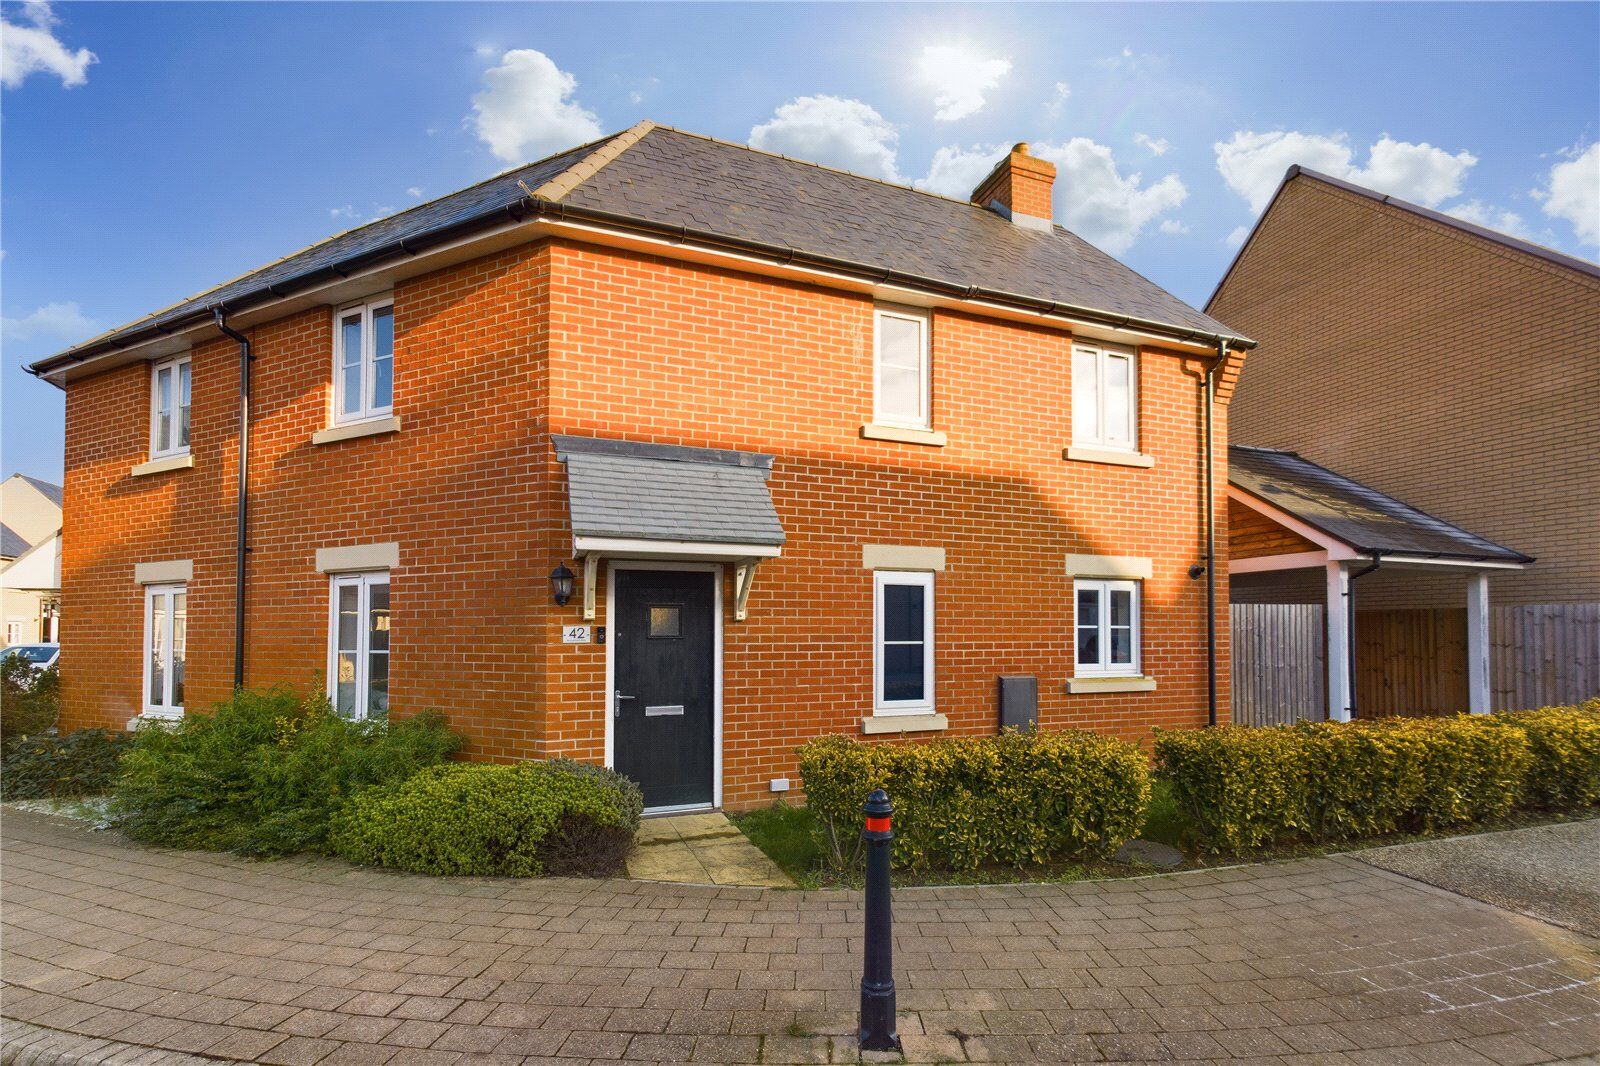 3 bedroom semi detached house for sale Rutherford Way, Biggleswade, SG18, main image